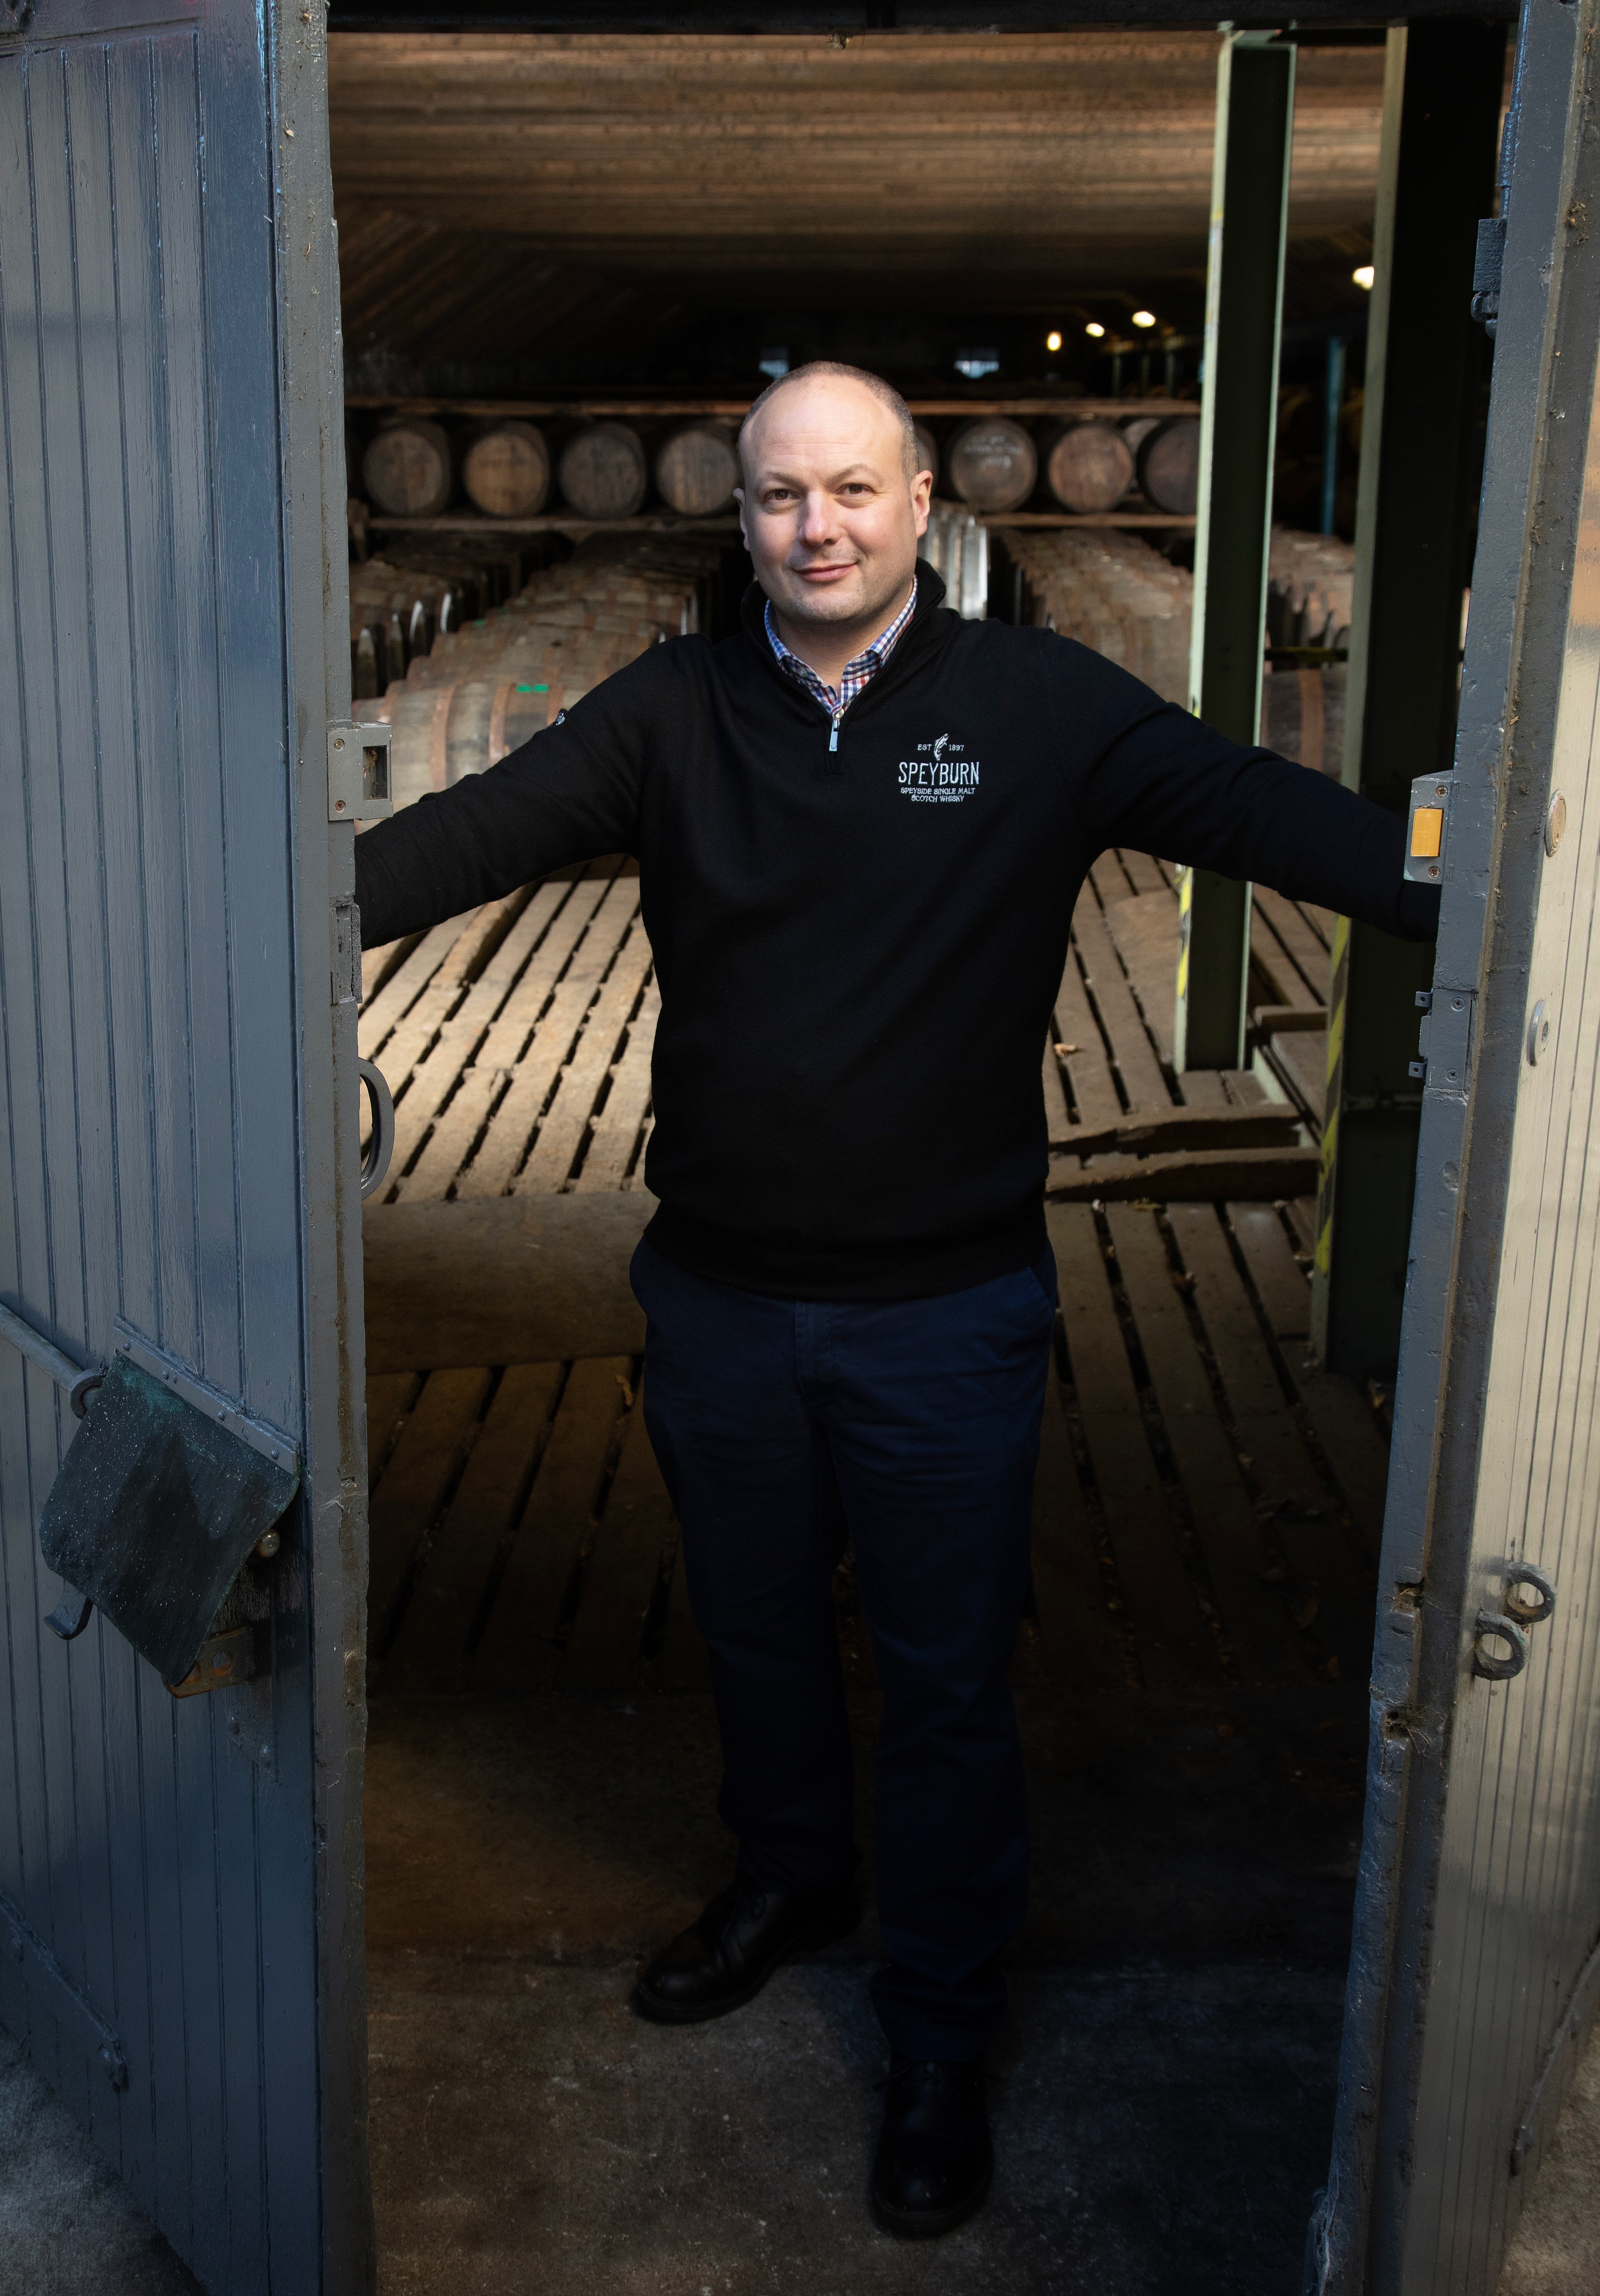 Historic Scottish Distillery Reopens to Public After 126 Years